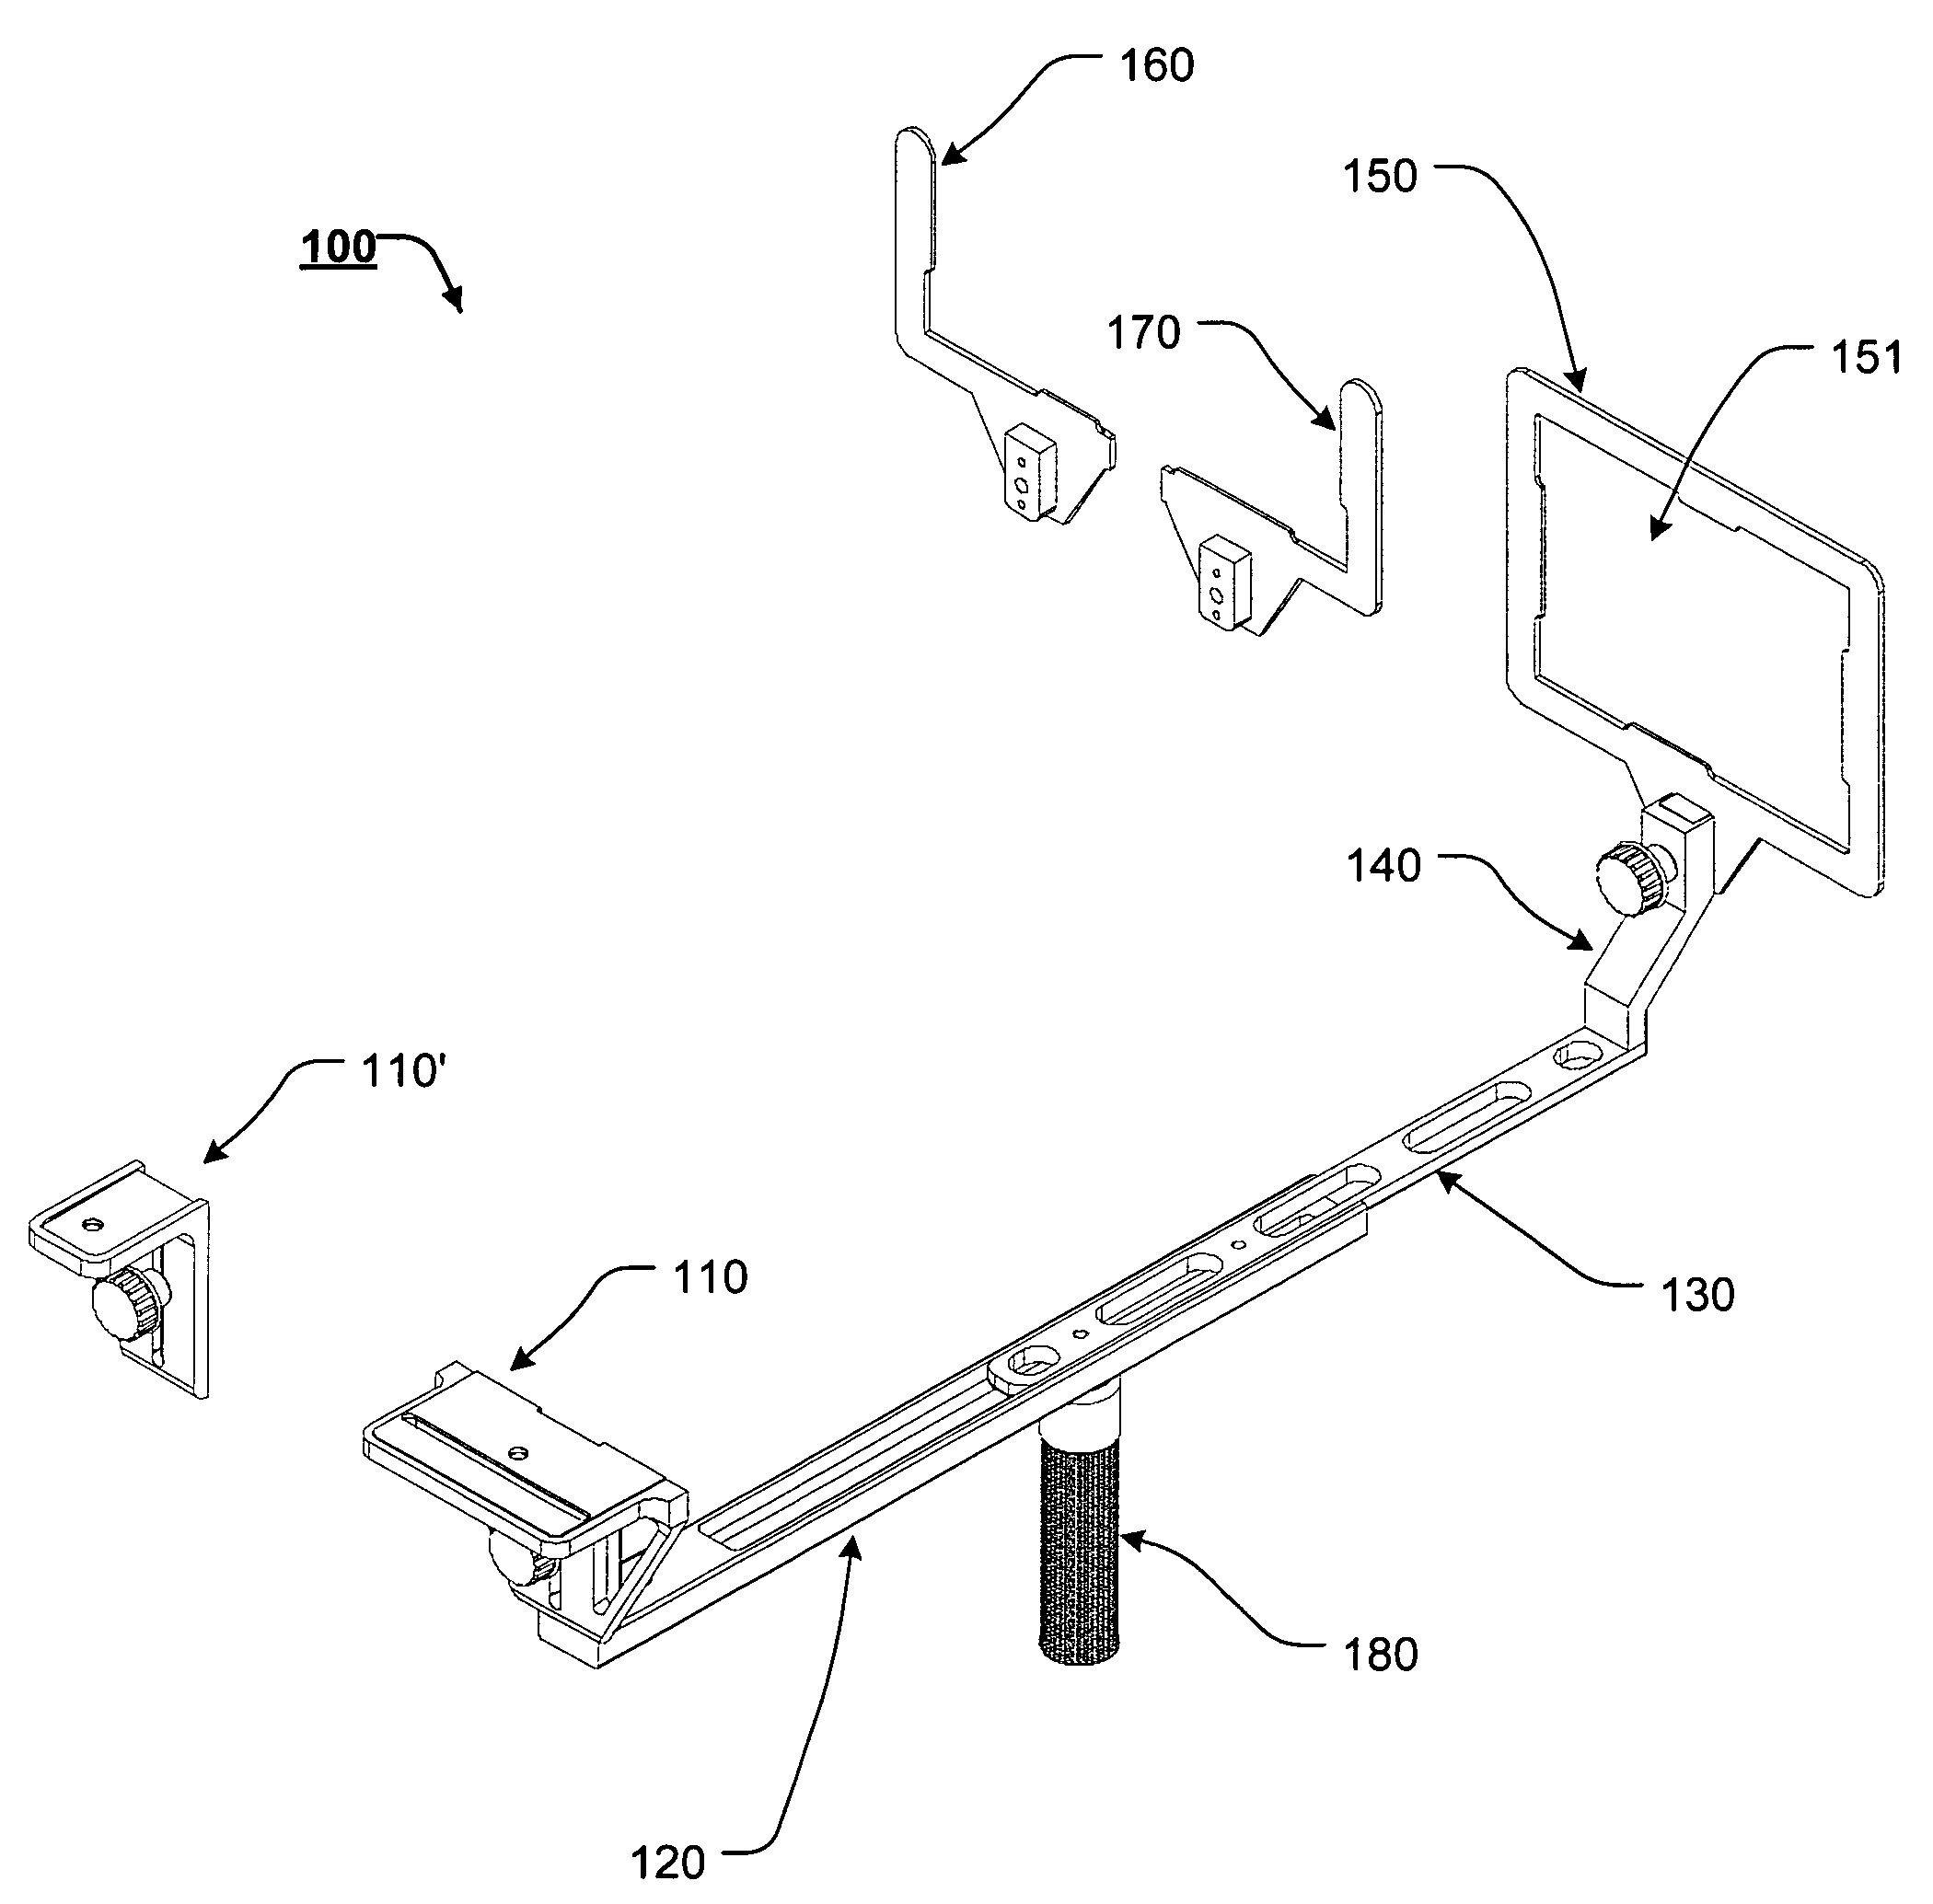 Device for reduction of angular distortion in photograpy